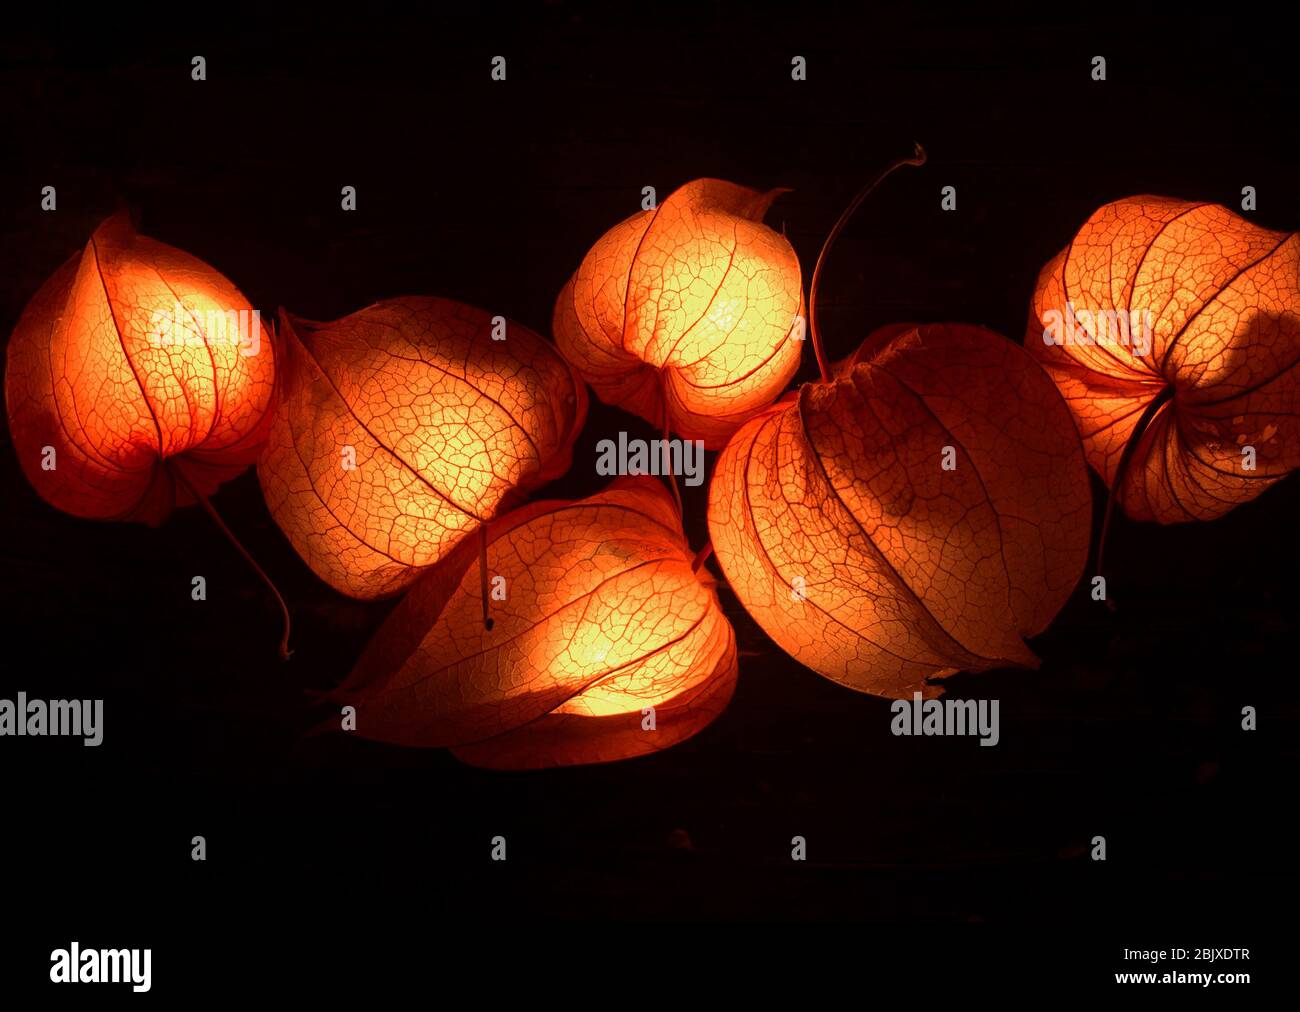 Dry Lampion, Dried branch of physalises, Chinese lantern, Physalis ...